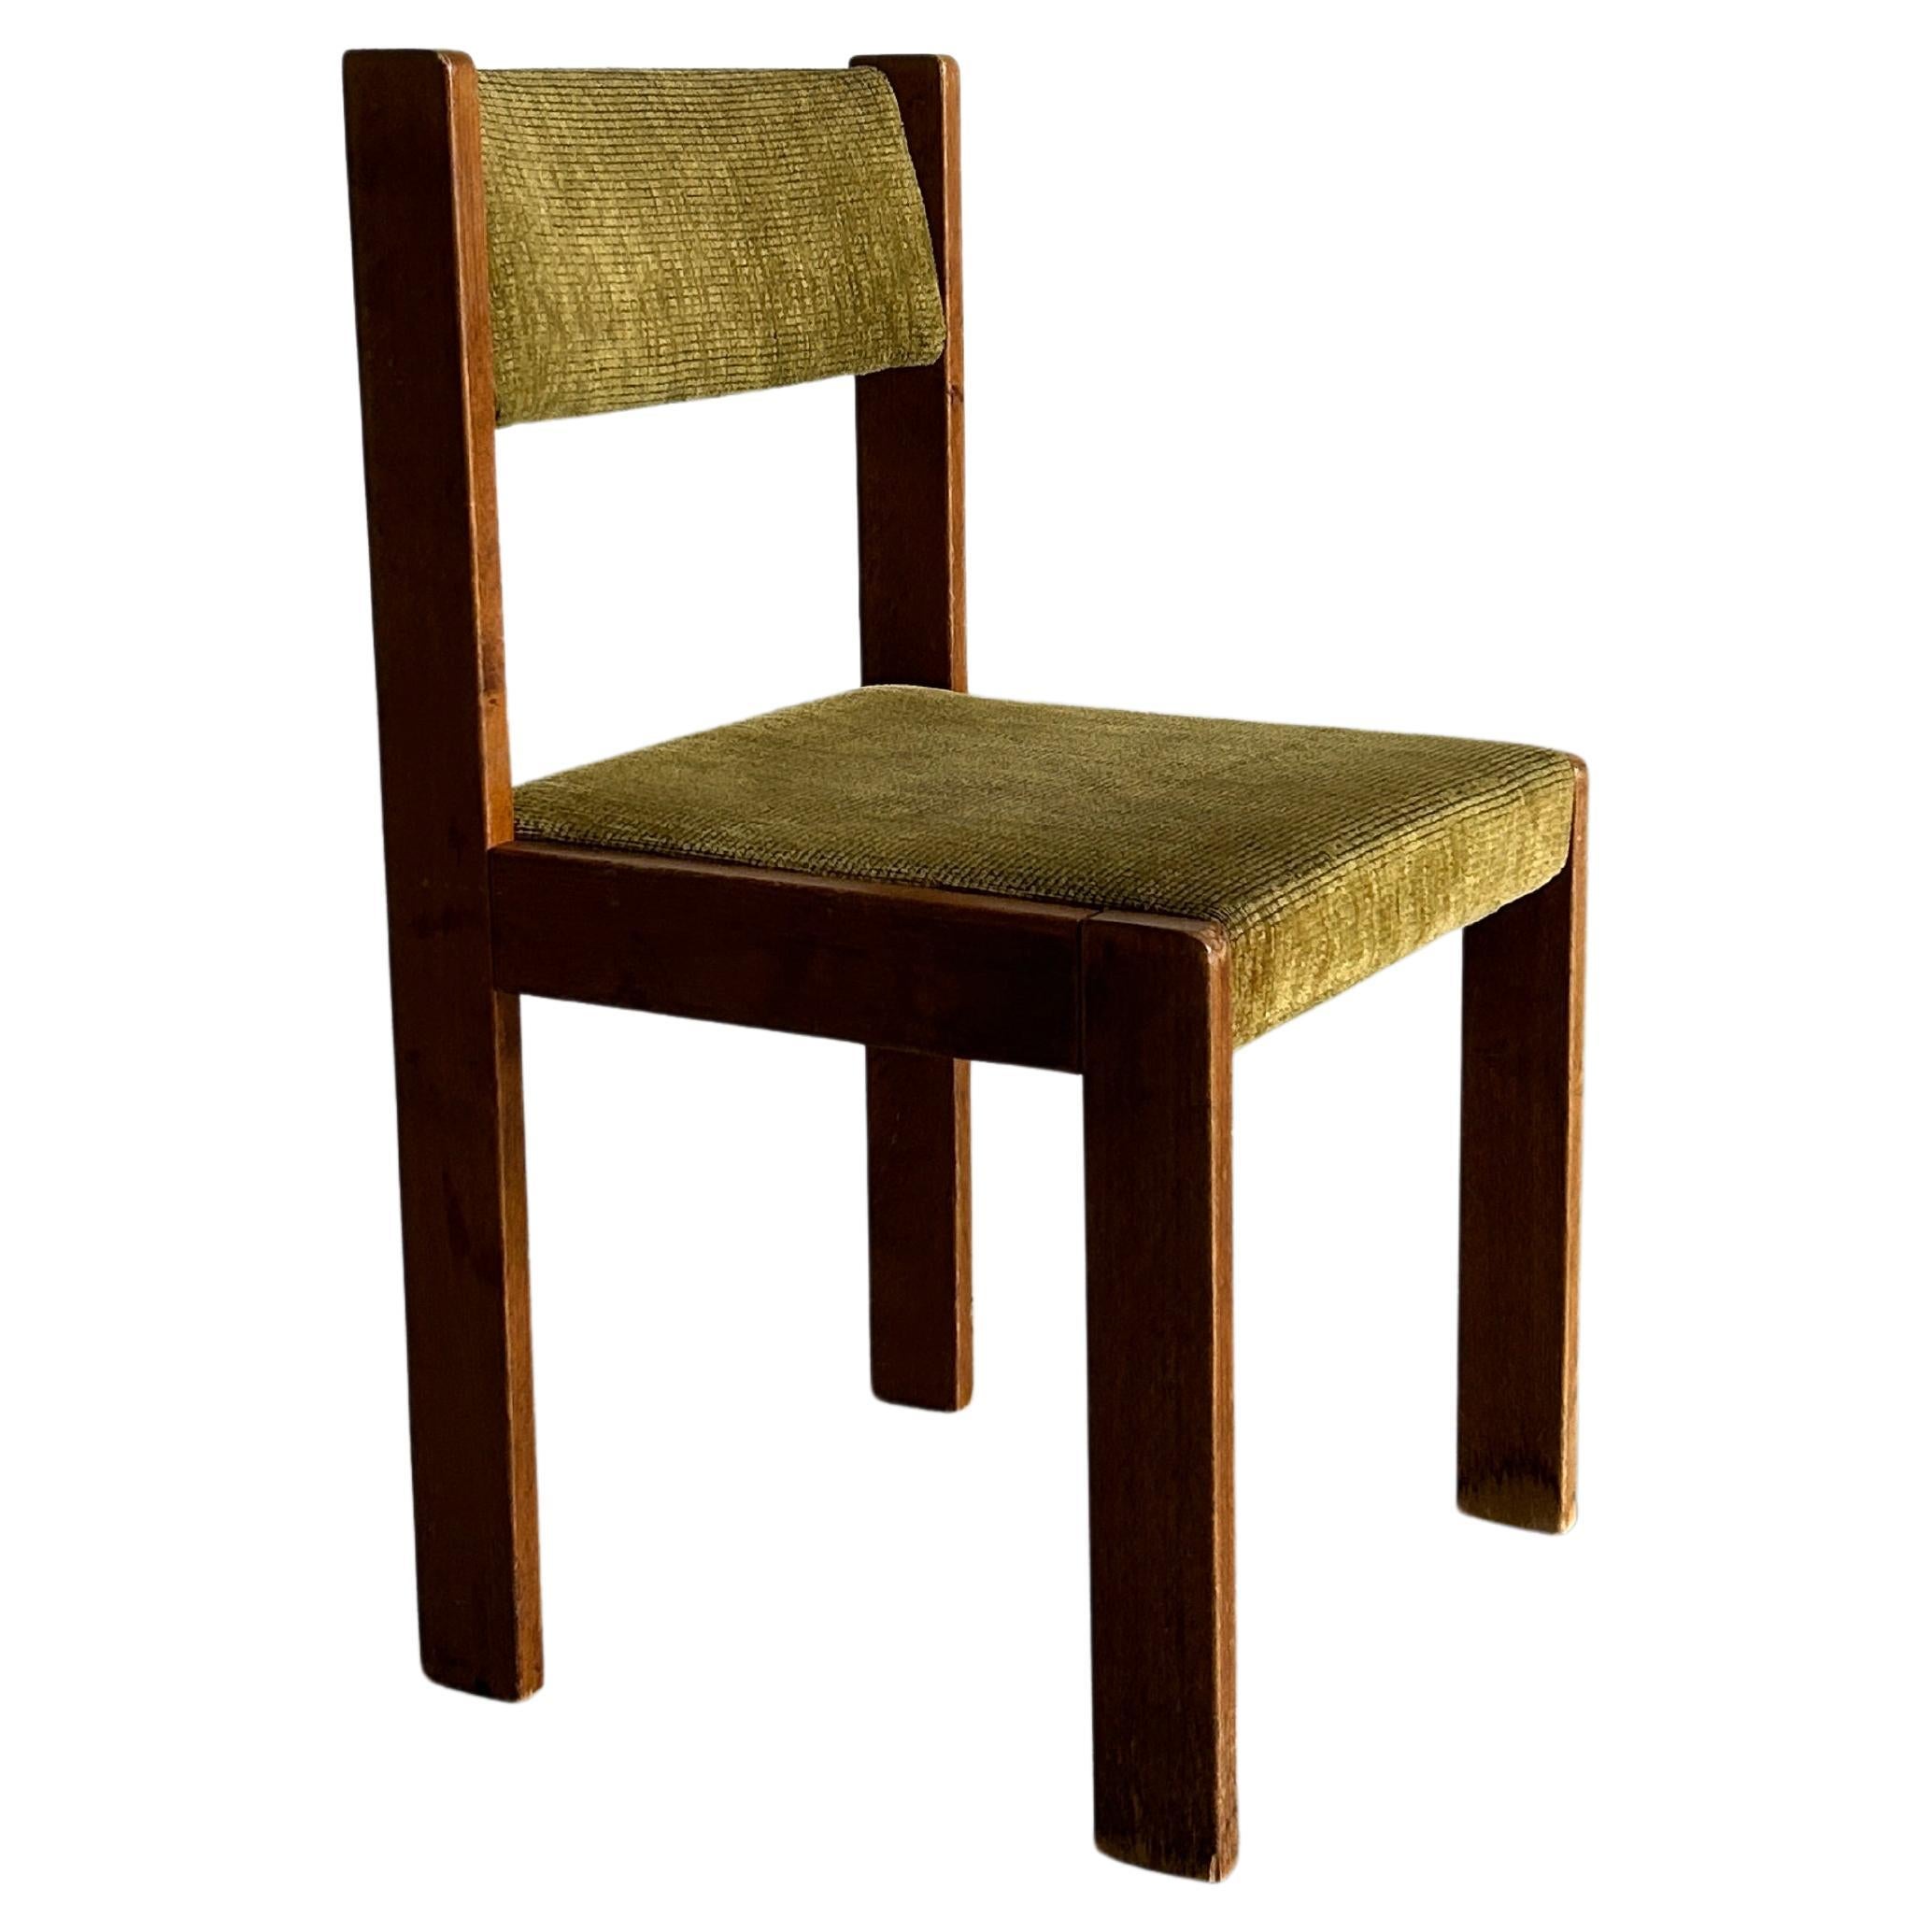 Mid-Century Modern Constructivist Dining Chair by Wiesner Hager, 1960s Austria For Sale